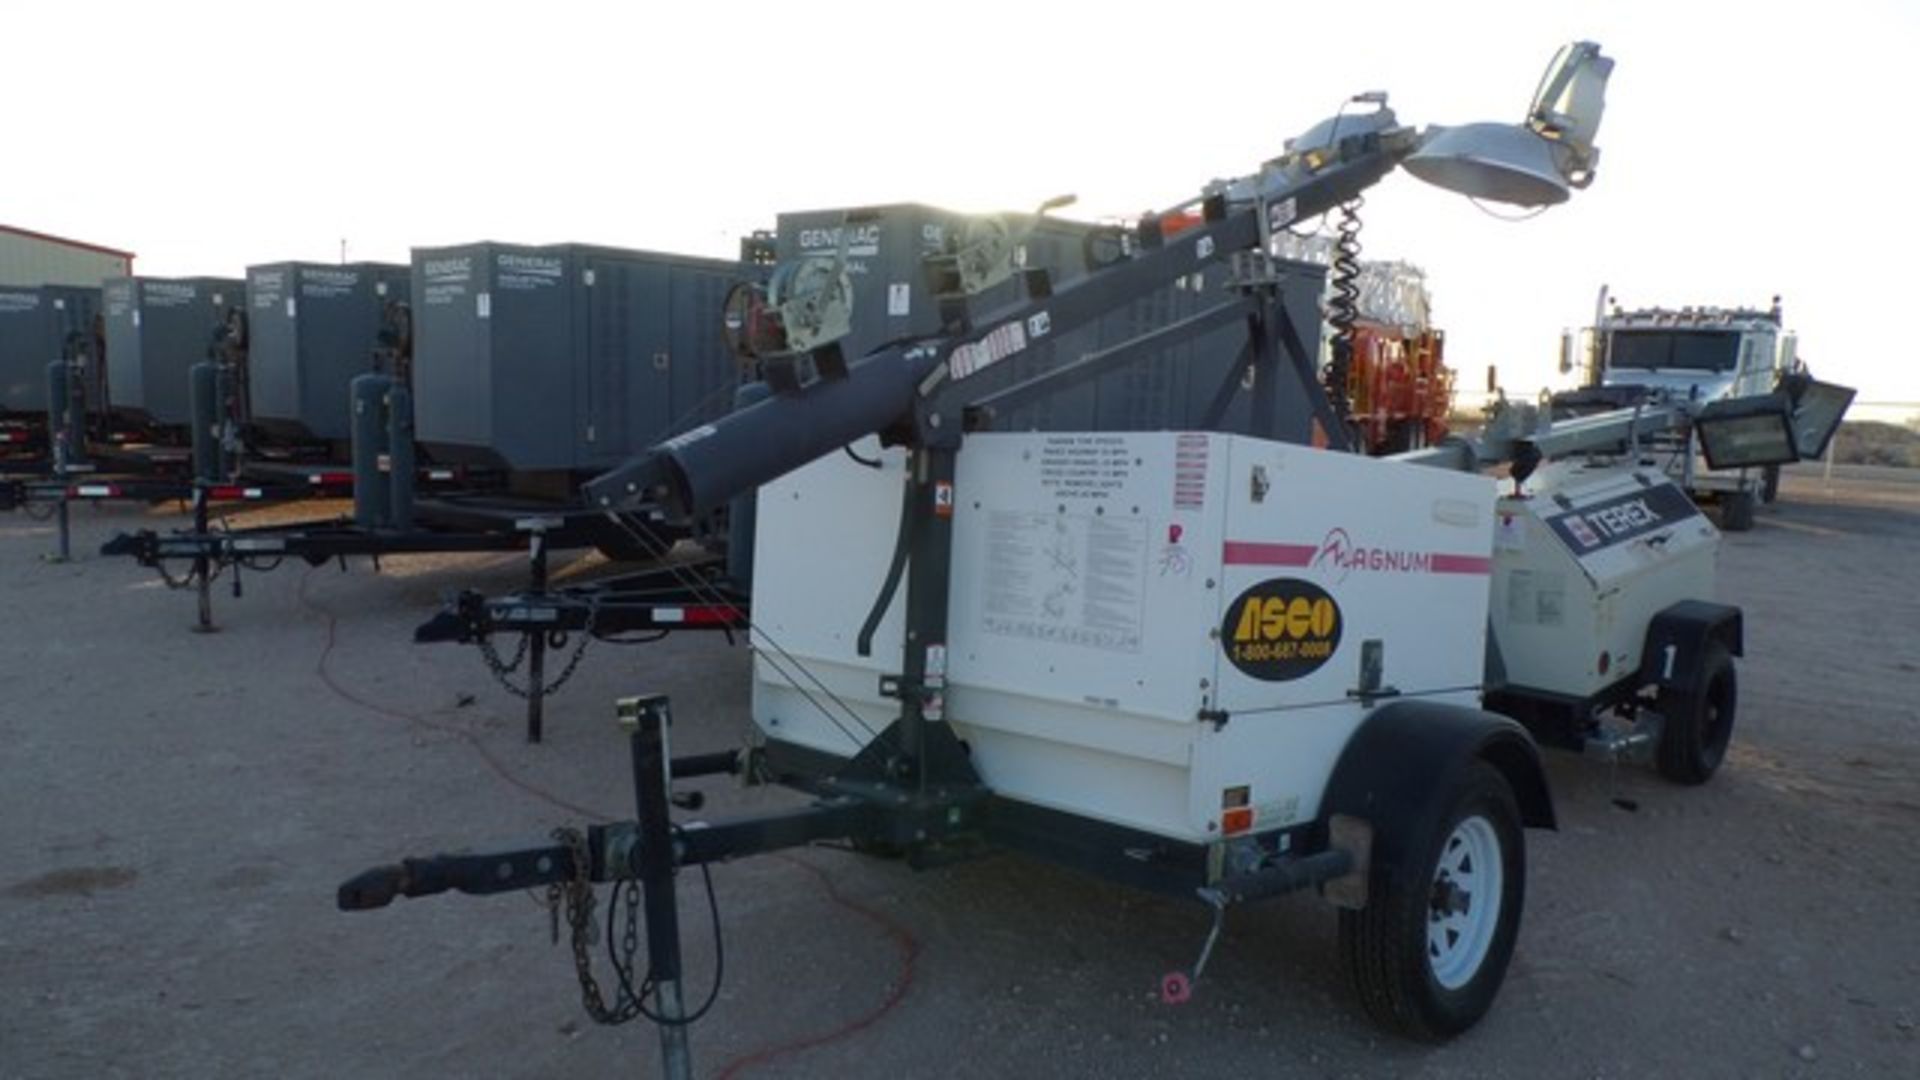 Located in YARD 1 - Midland, TX (2803) 2012 MAGNUM MLT5060K S/A LIGHT TOWER, SN- 1114756, P/B 3